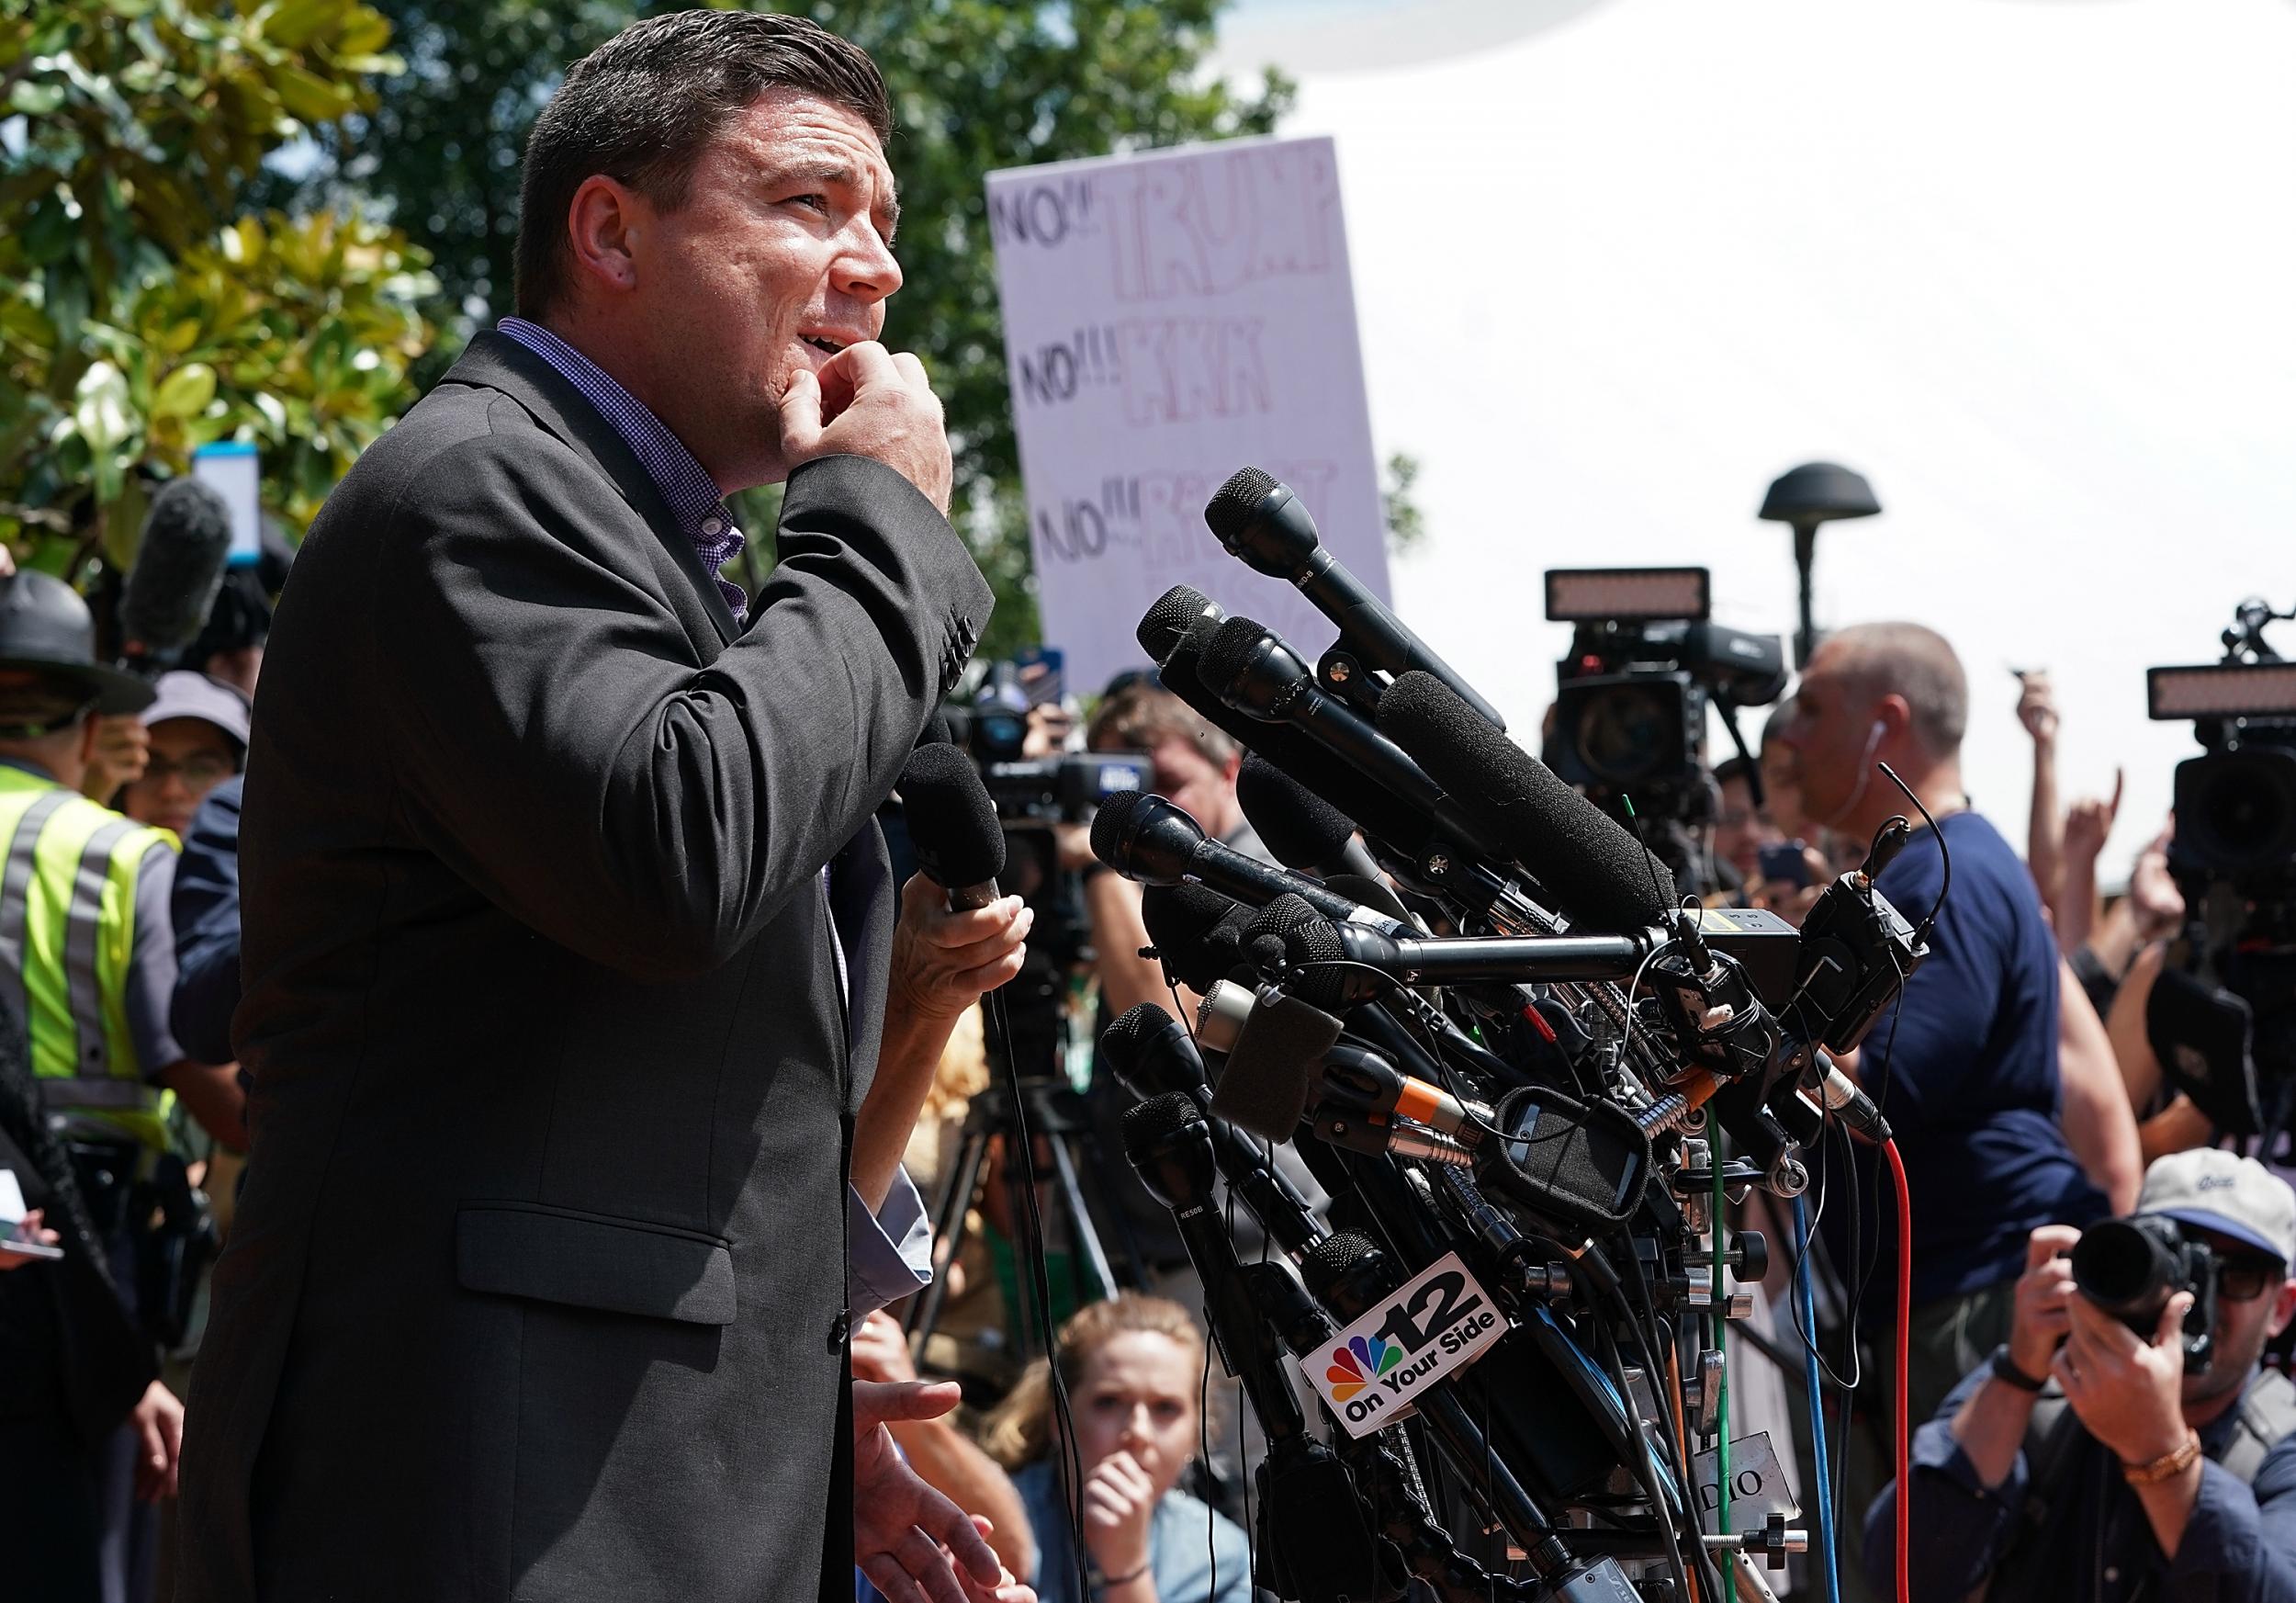 Jason Kessler, an organizer of 'Unite the Right' rally, tries to speak while being shouted down by counter protesters outside the Charlottesville City Hall